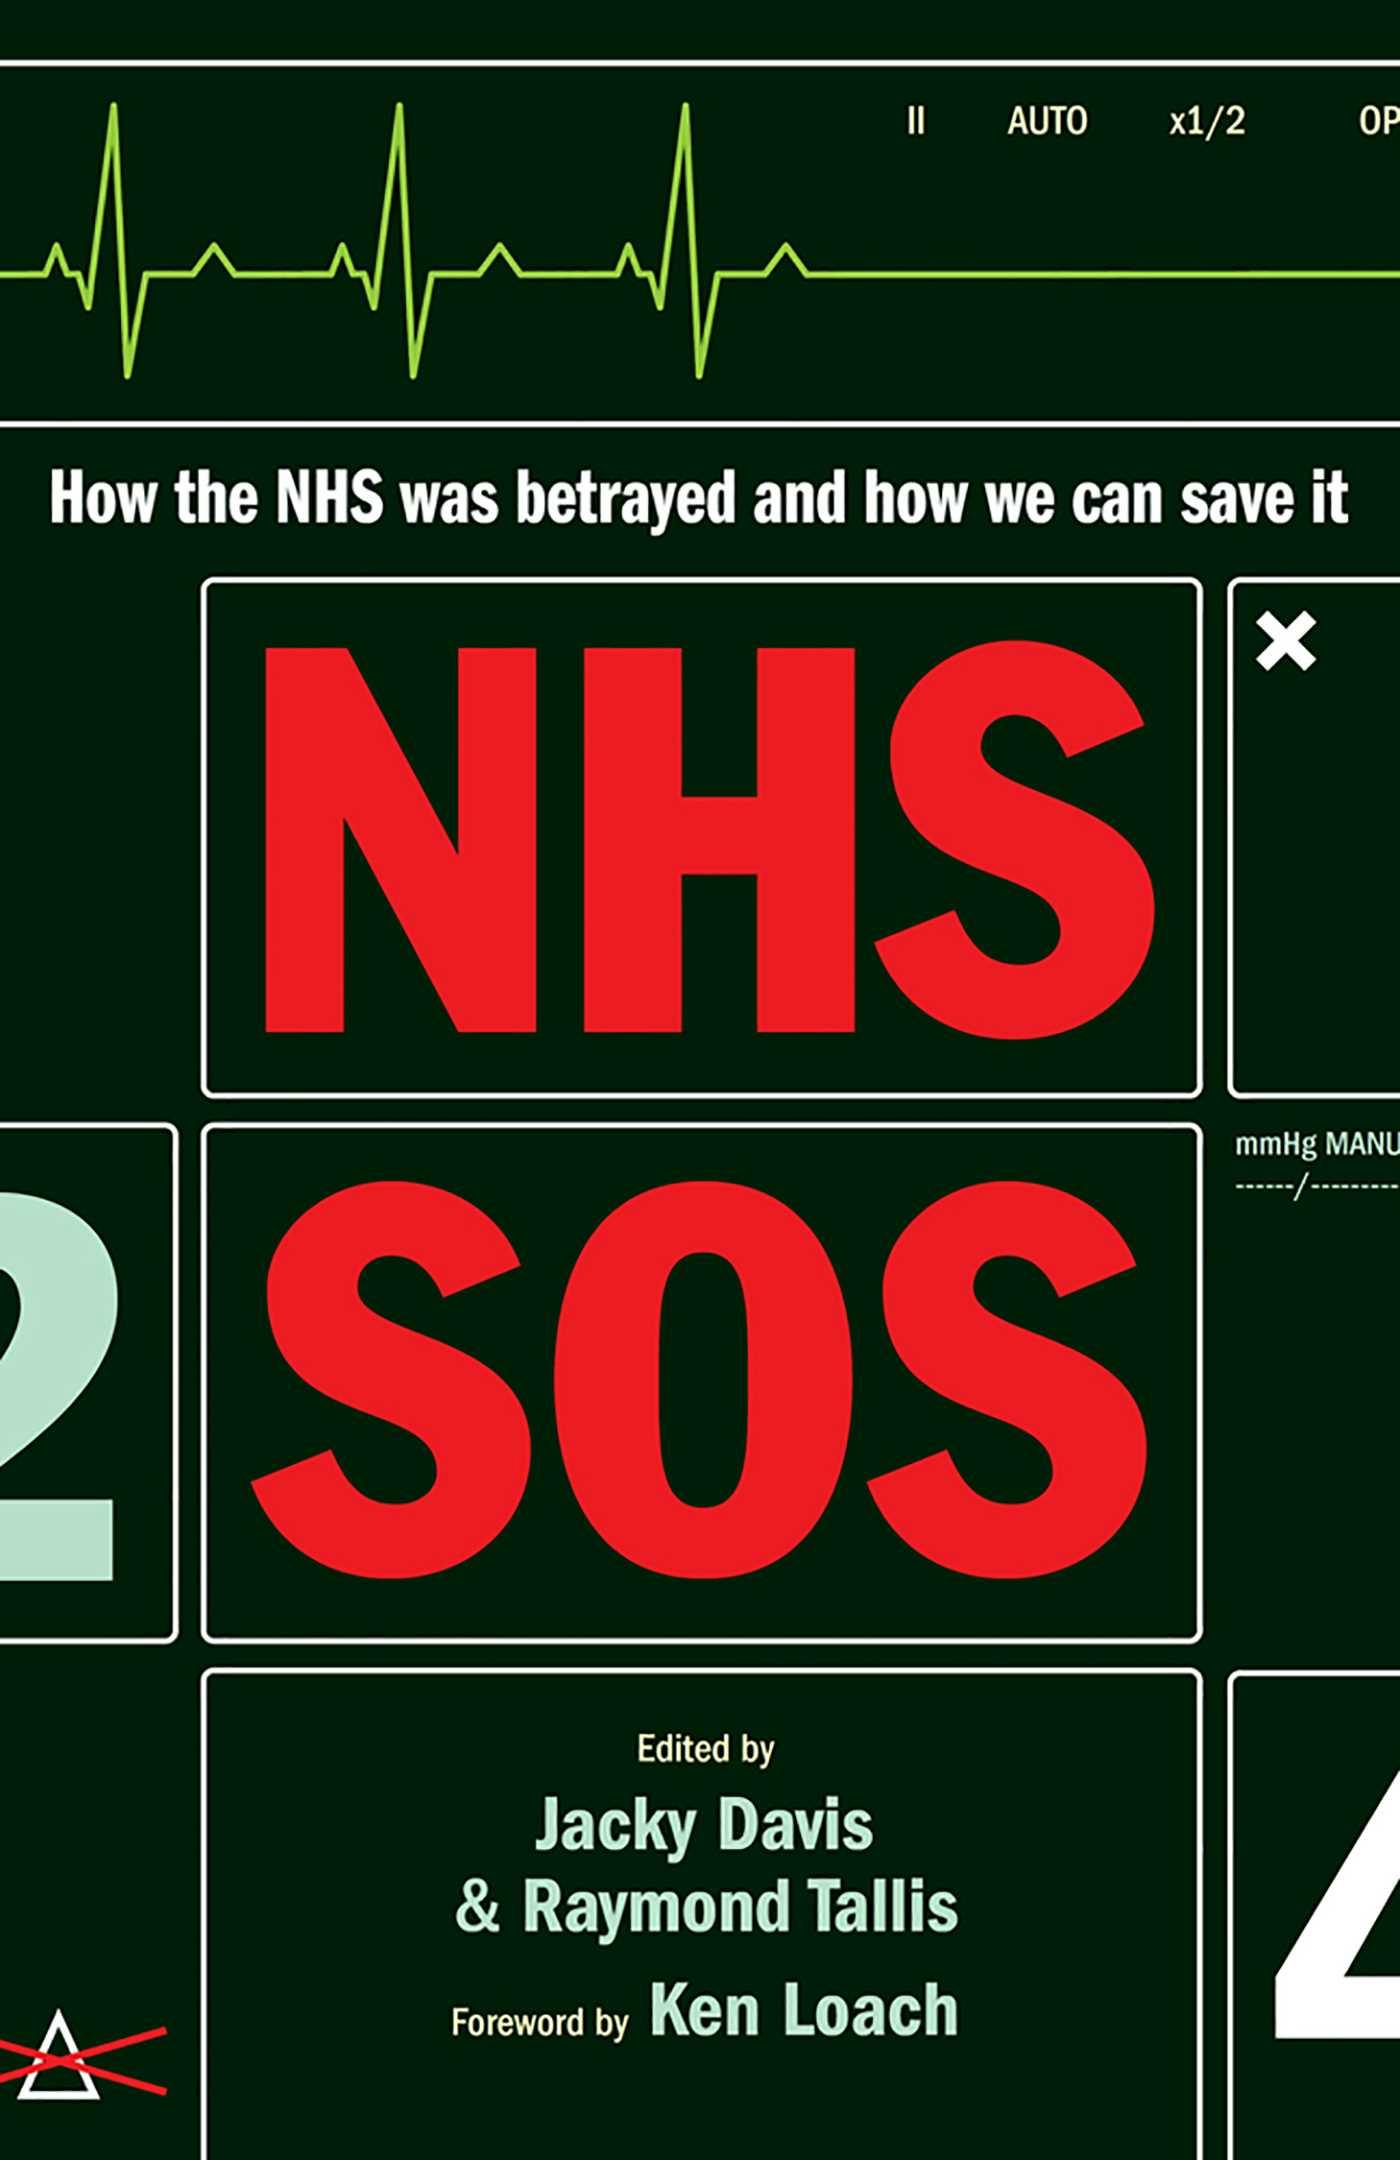 NHS SOS: How the NHS Was Betrayed - and How We Can Save It - Jacky Davis, Raymond Tallis